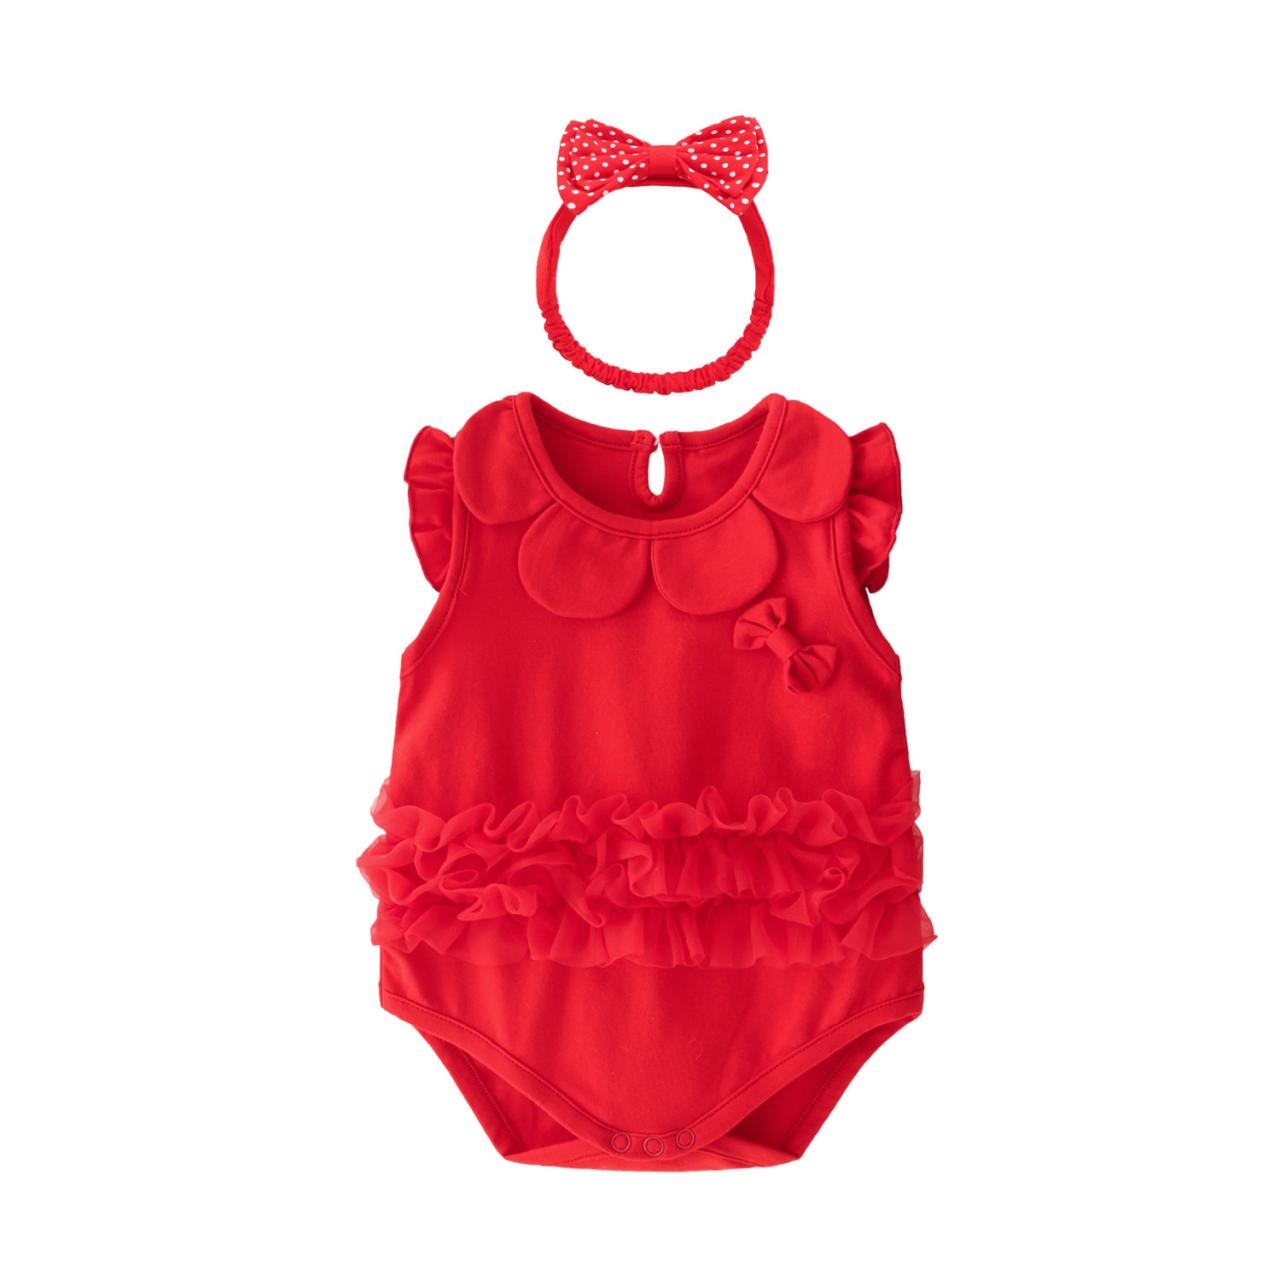 Summer female baby festive red full moon suit romper flying sleeves cotton jumpsuit robe hair band baby clothing